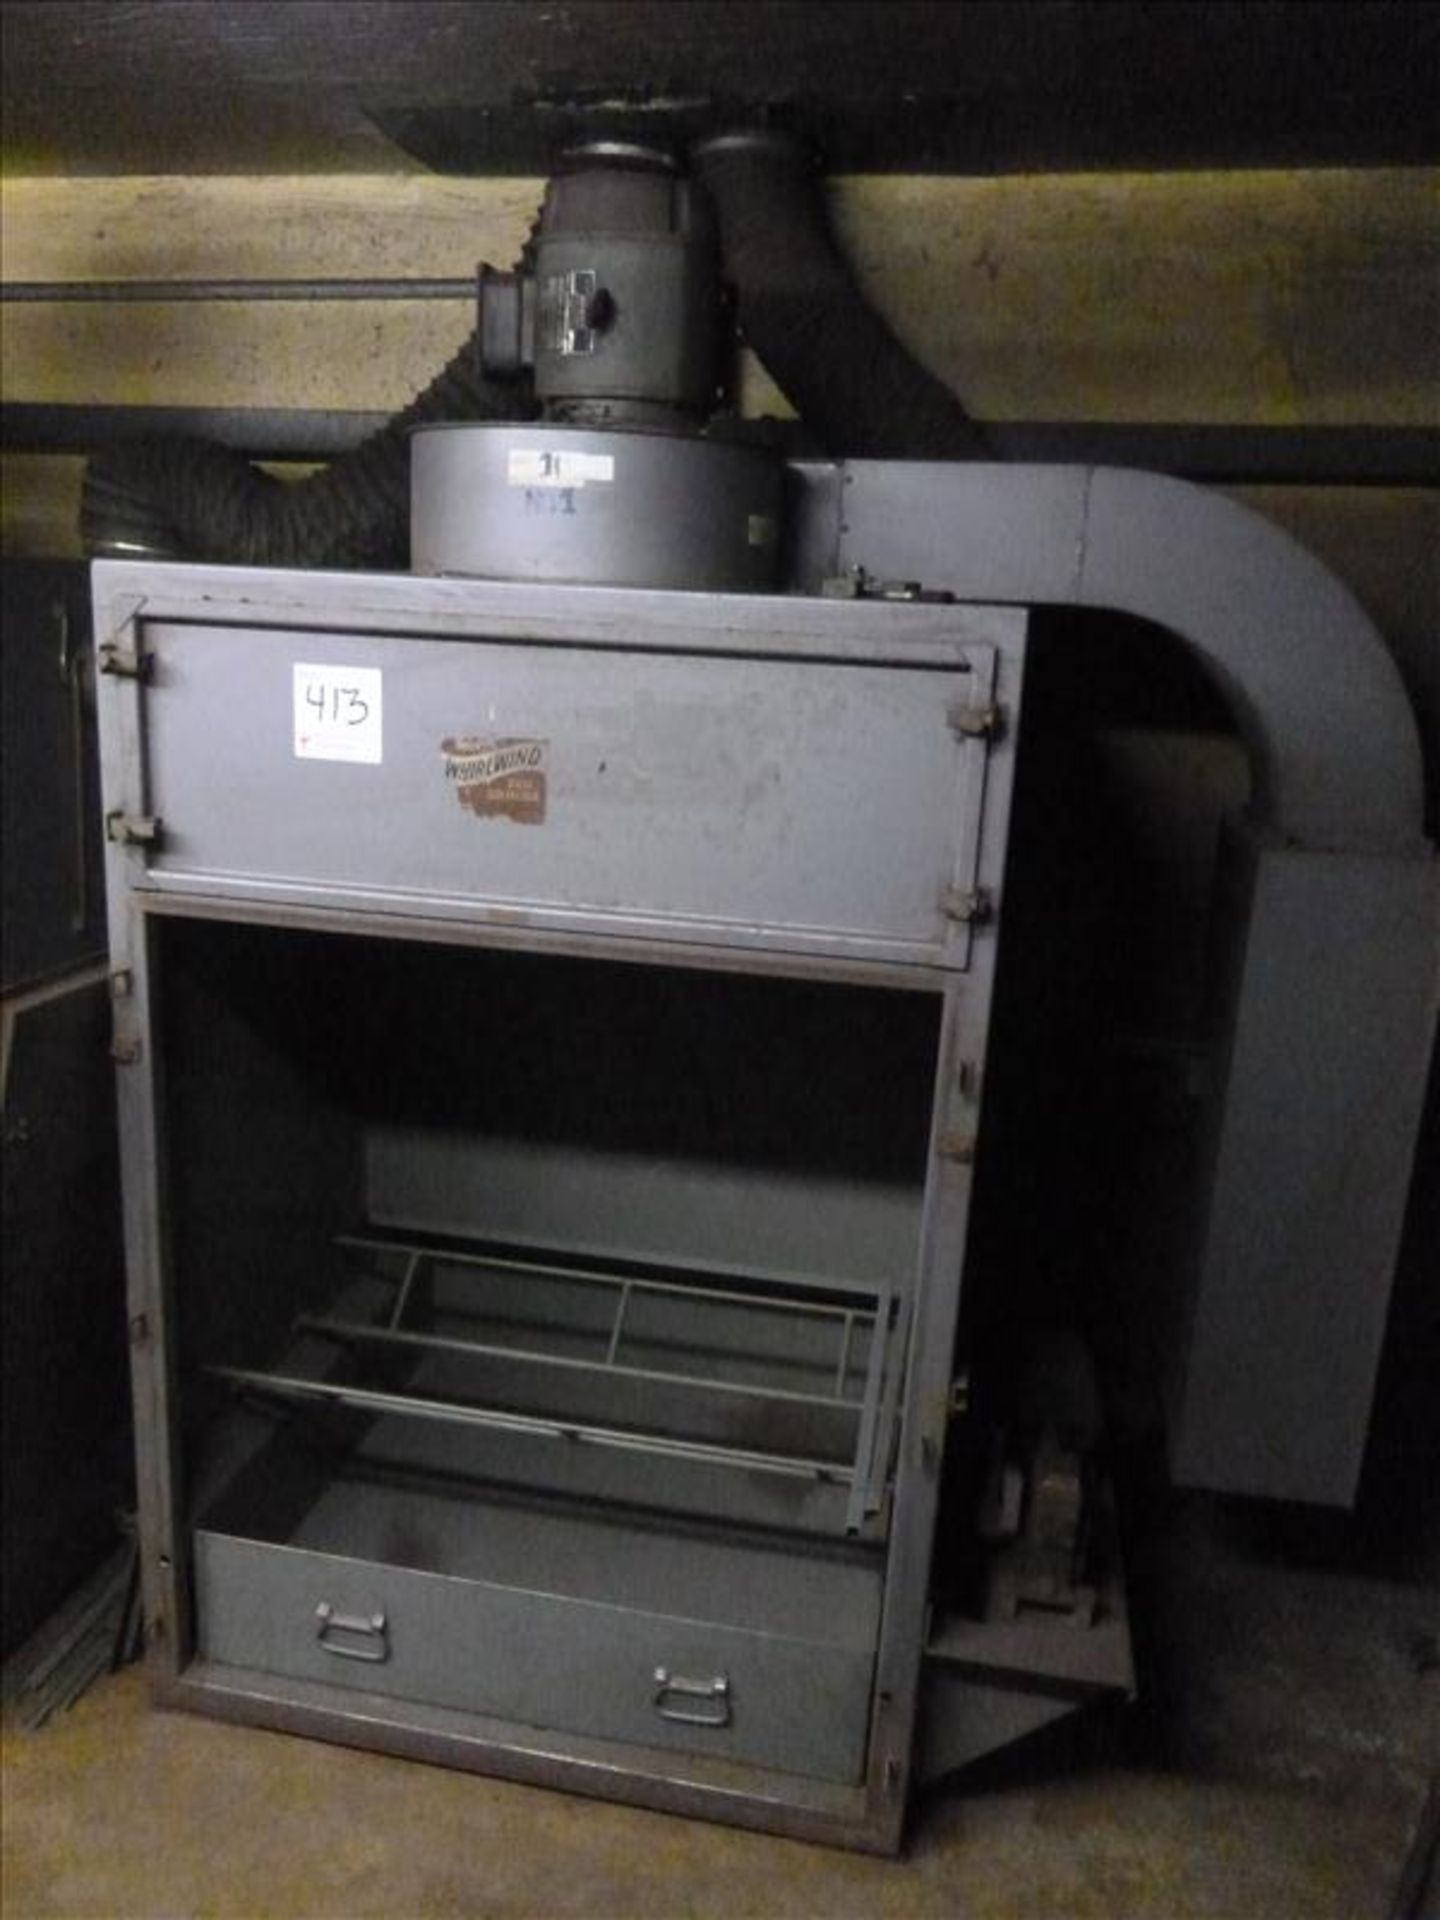 I. Shore 5 hp dust collector